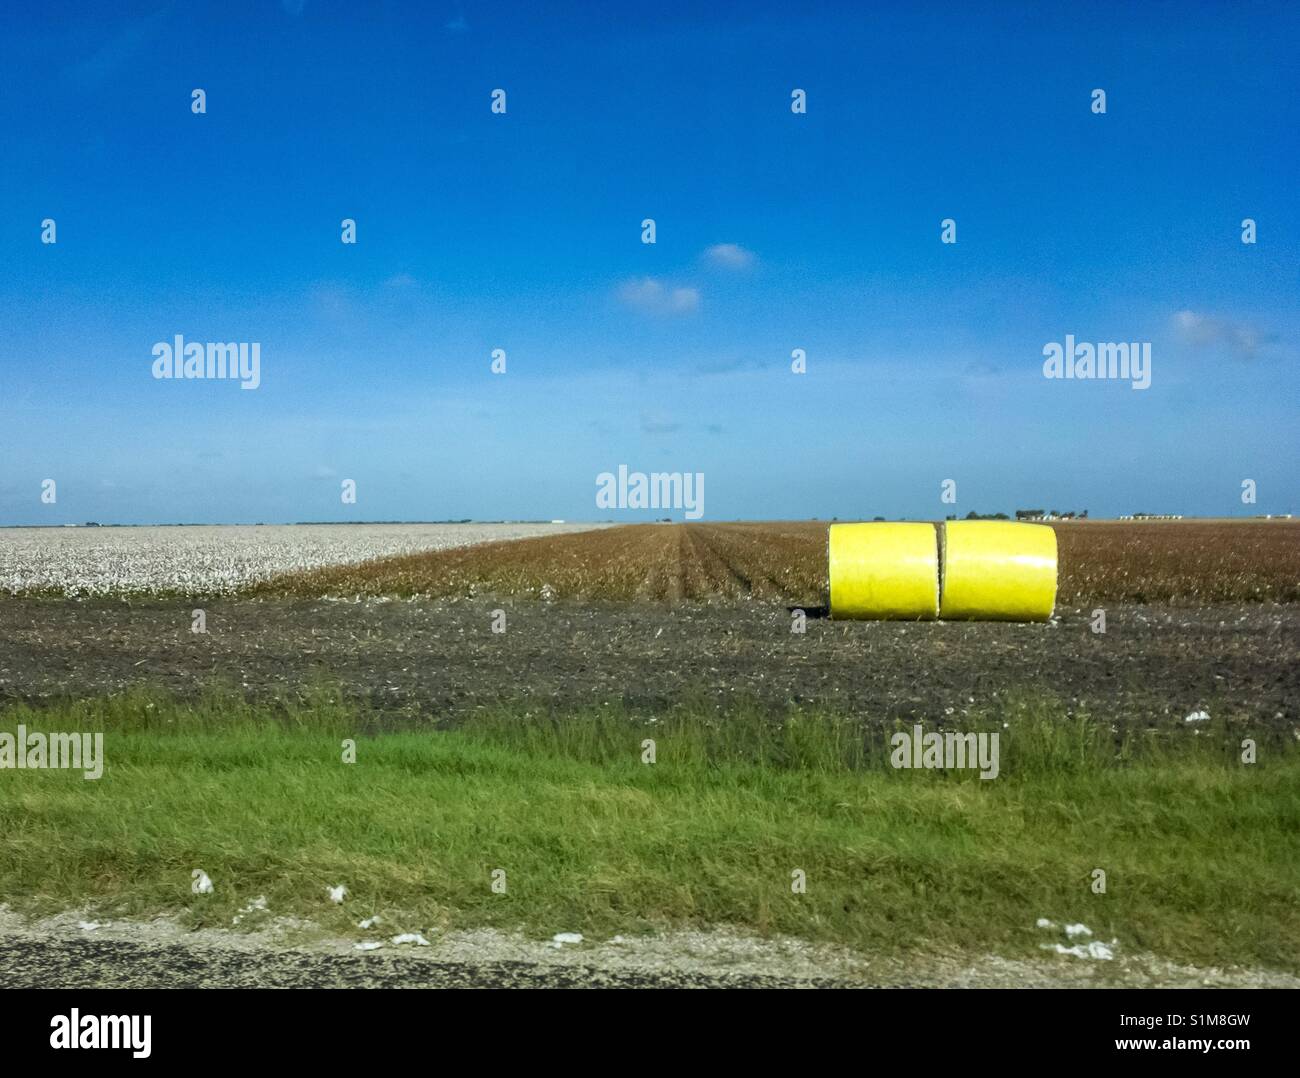 Baled and growing cotton in a Texas field. Stock Photo